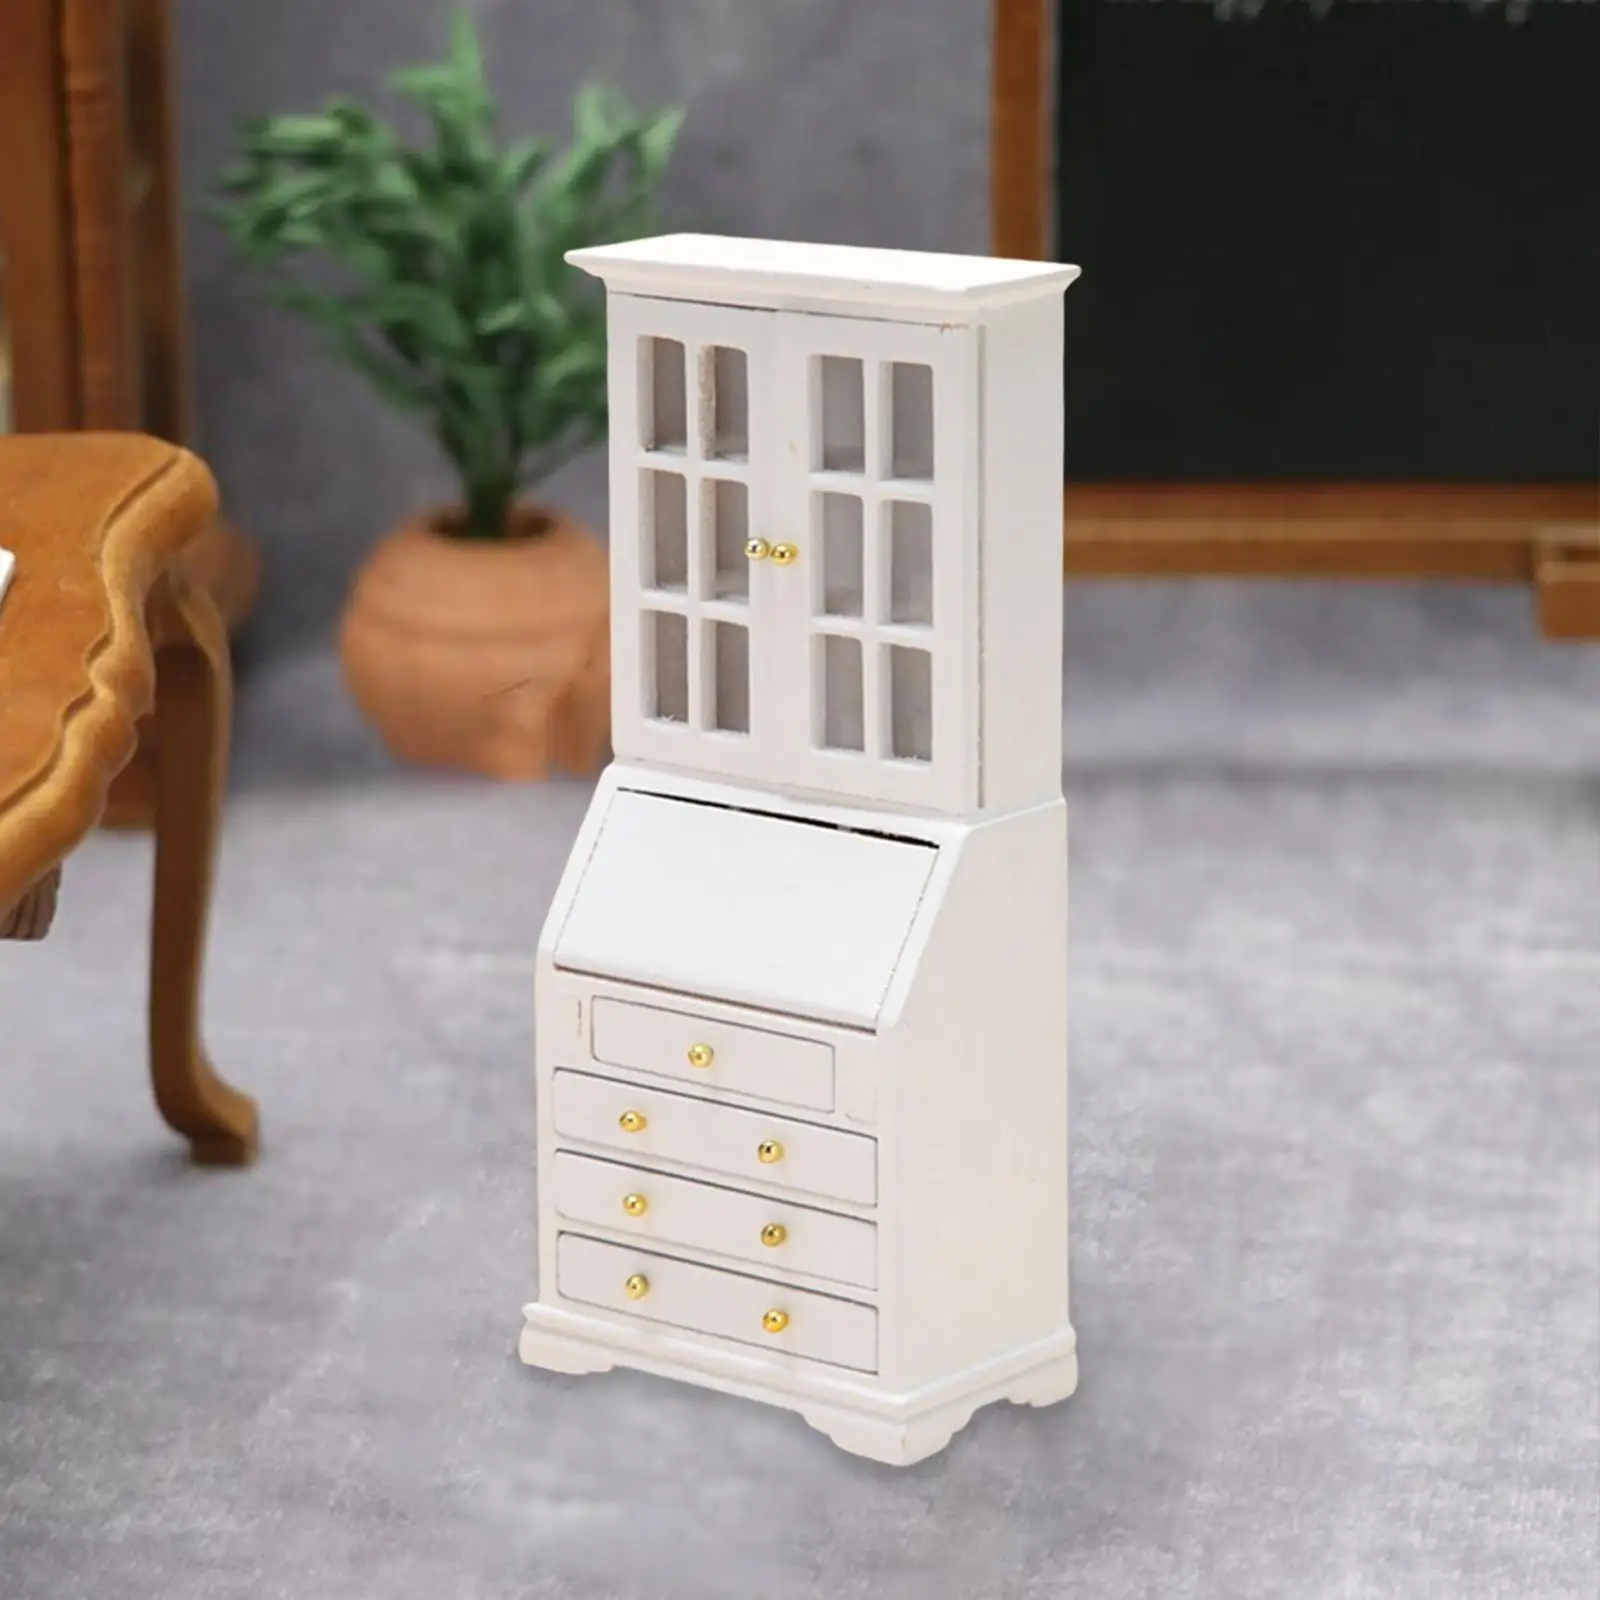 1/12 Dollhouse Bookcase with Drawers Miniature Wooden Model for Living Room Life Scene Scenery Exquisite Workmanship Delicate